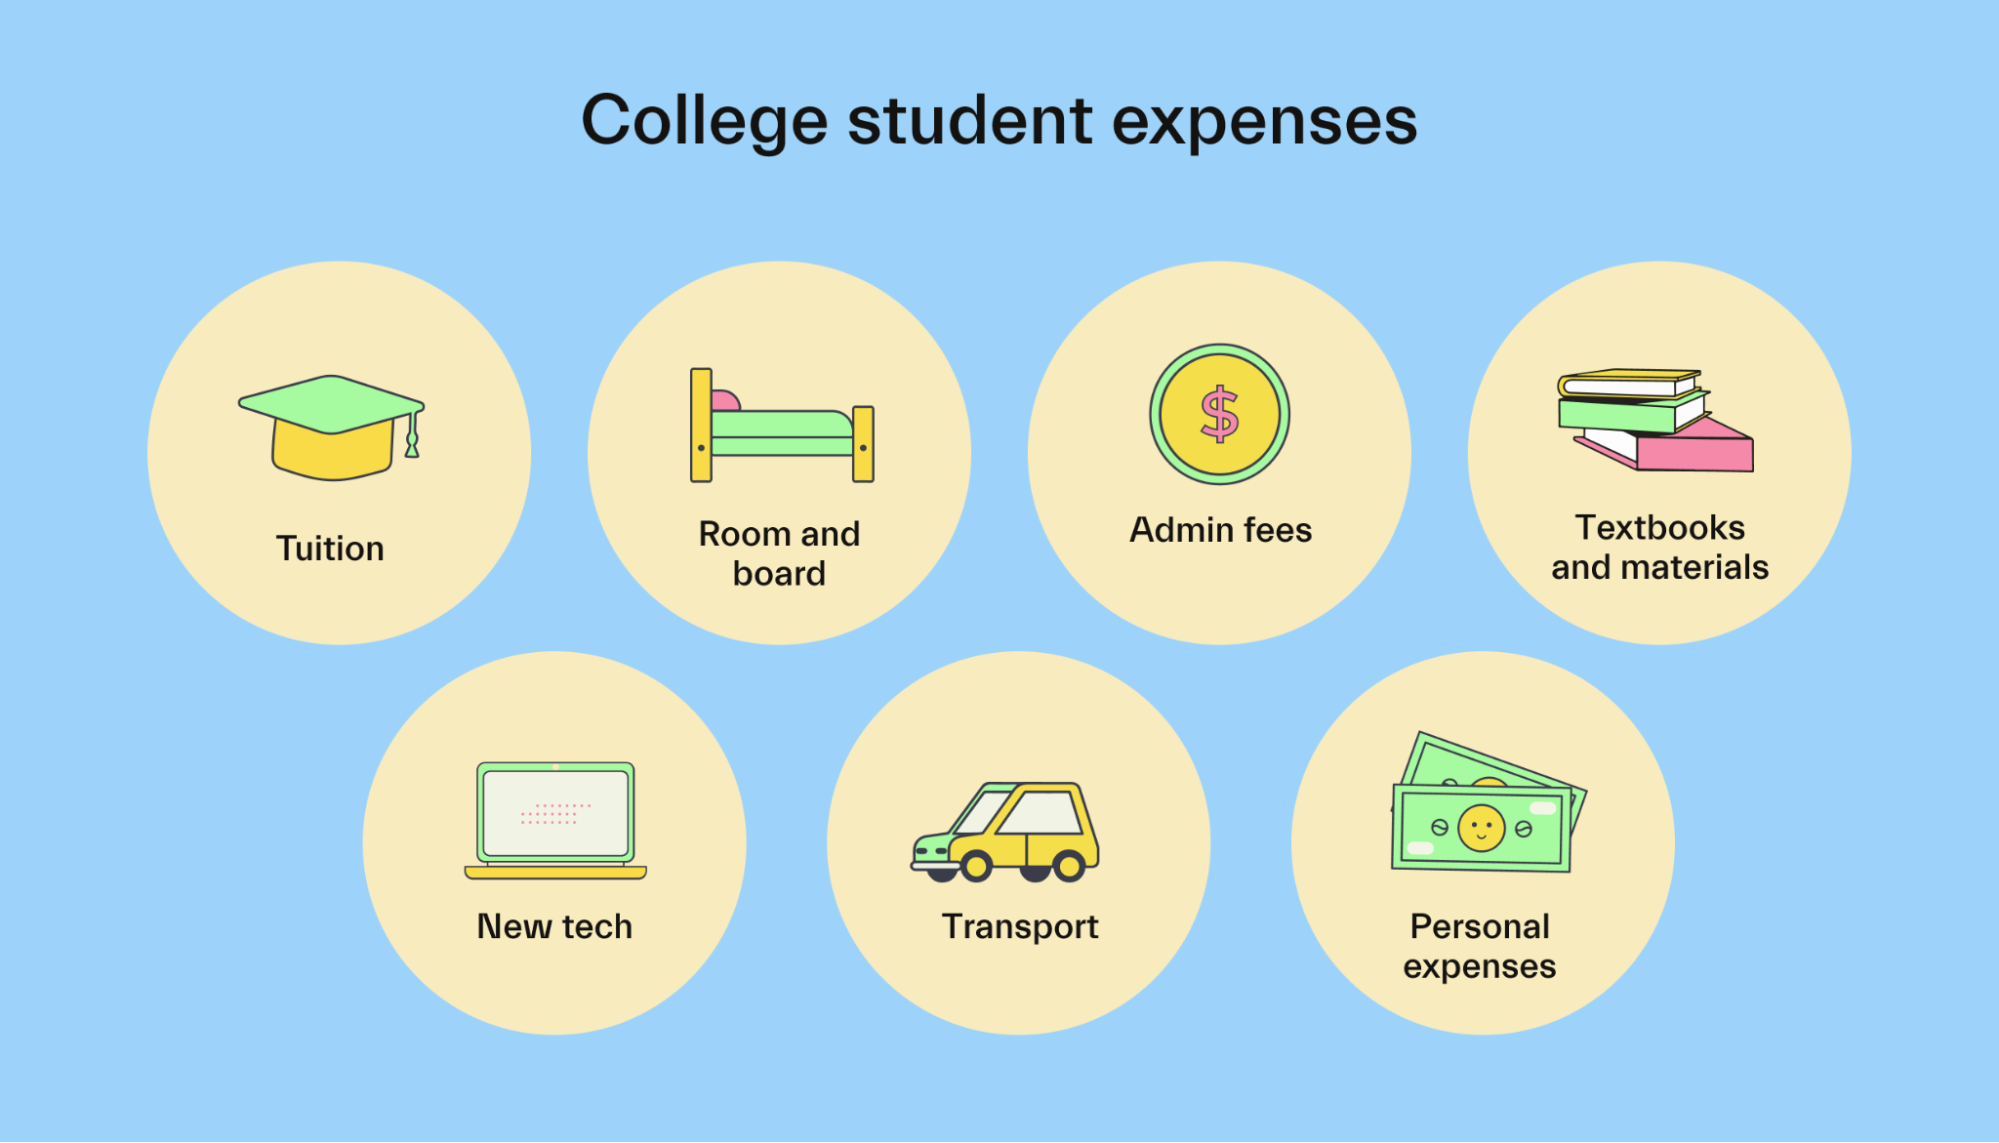 College student expenses